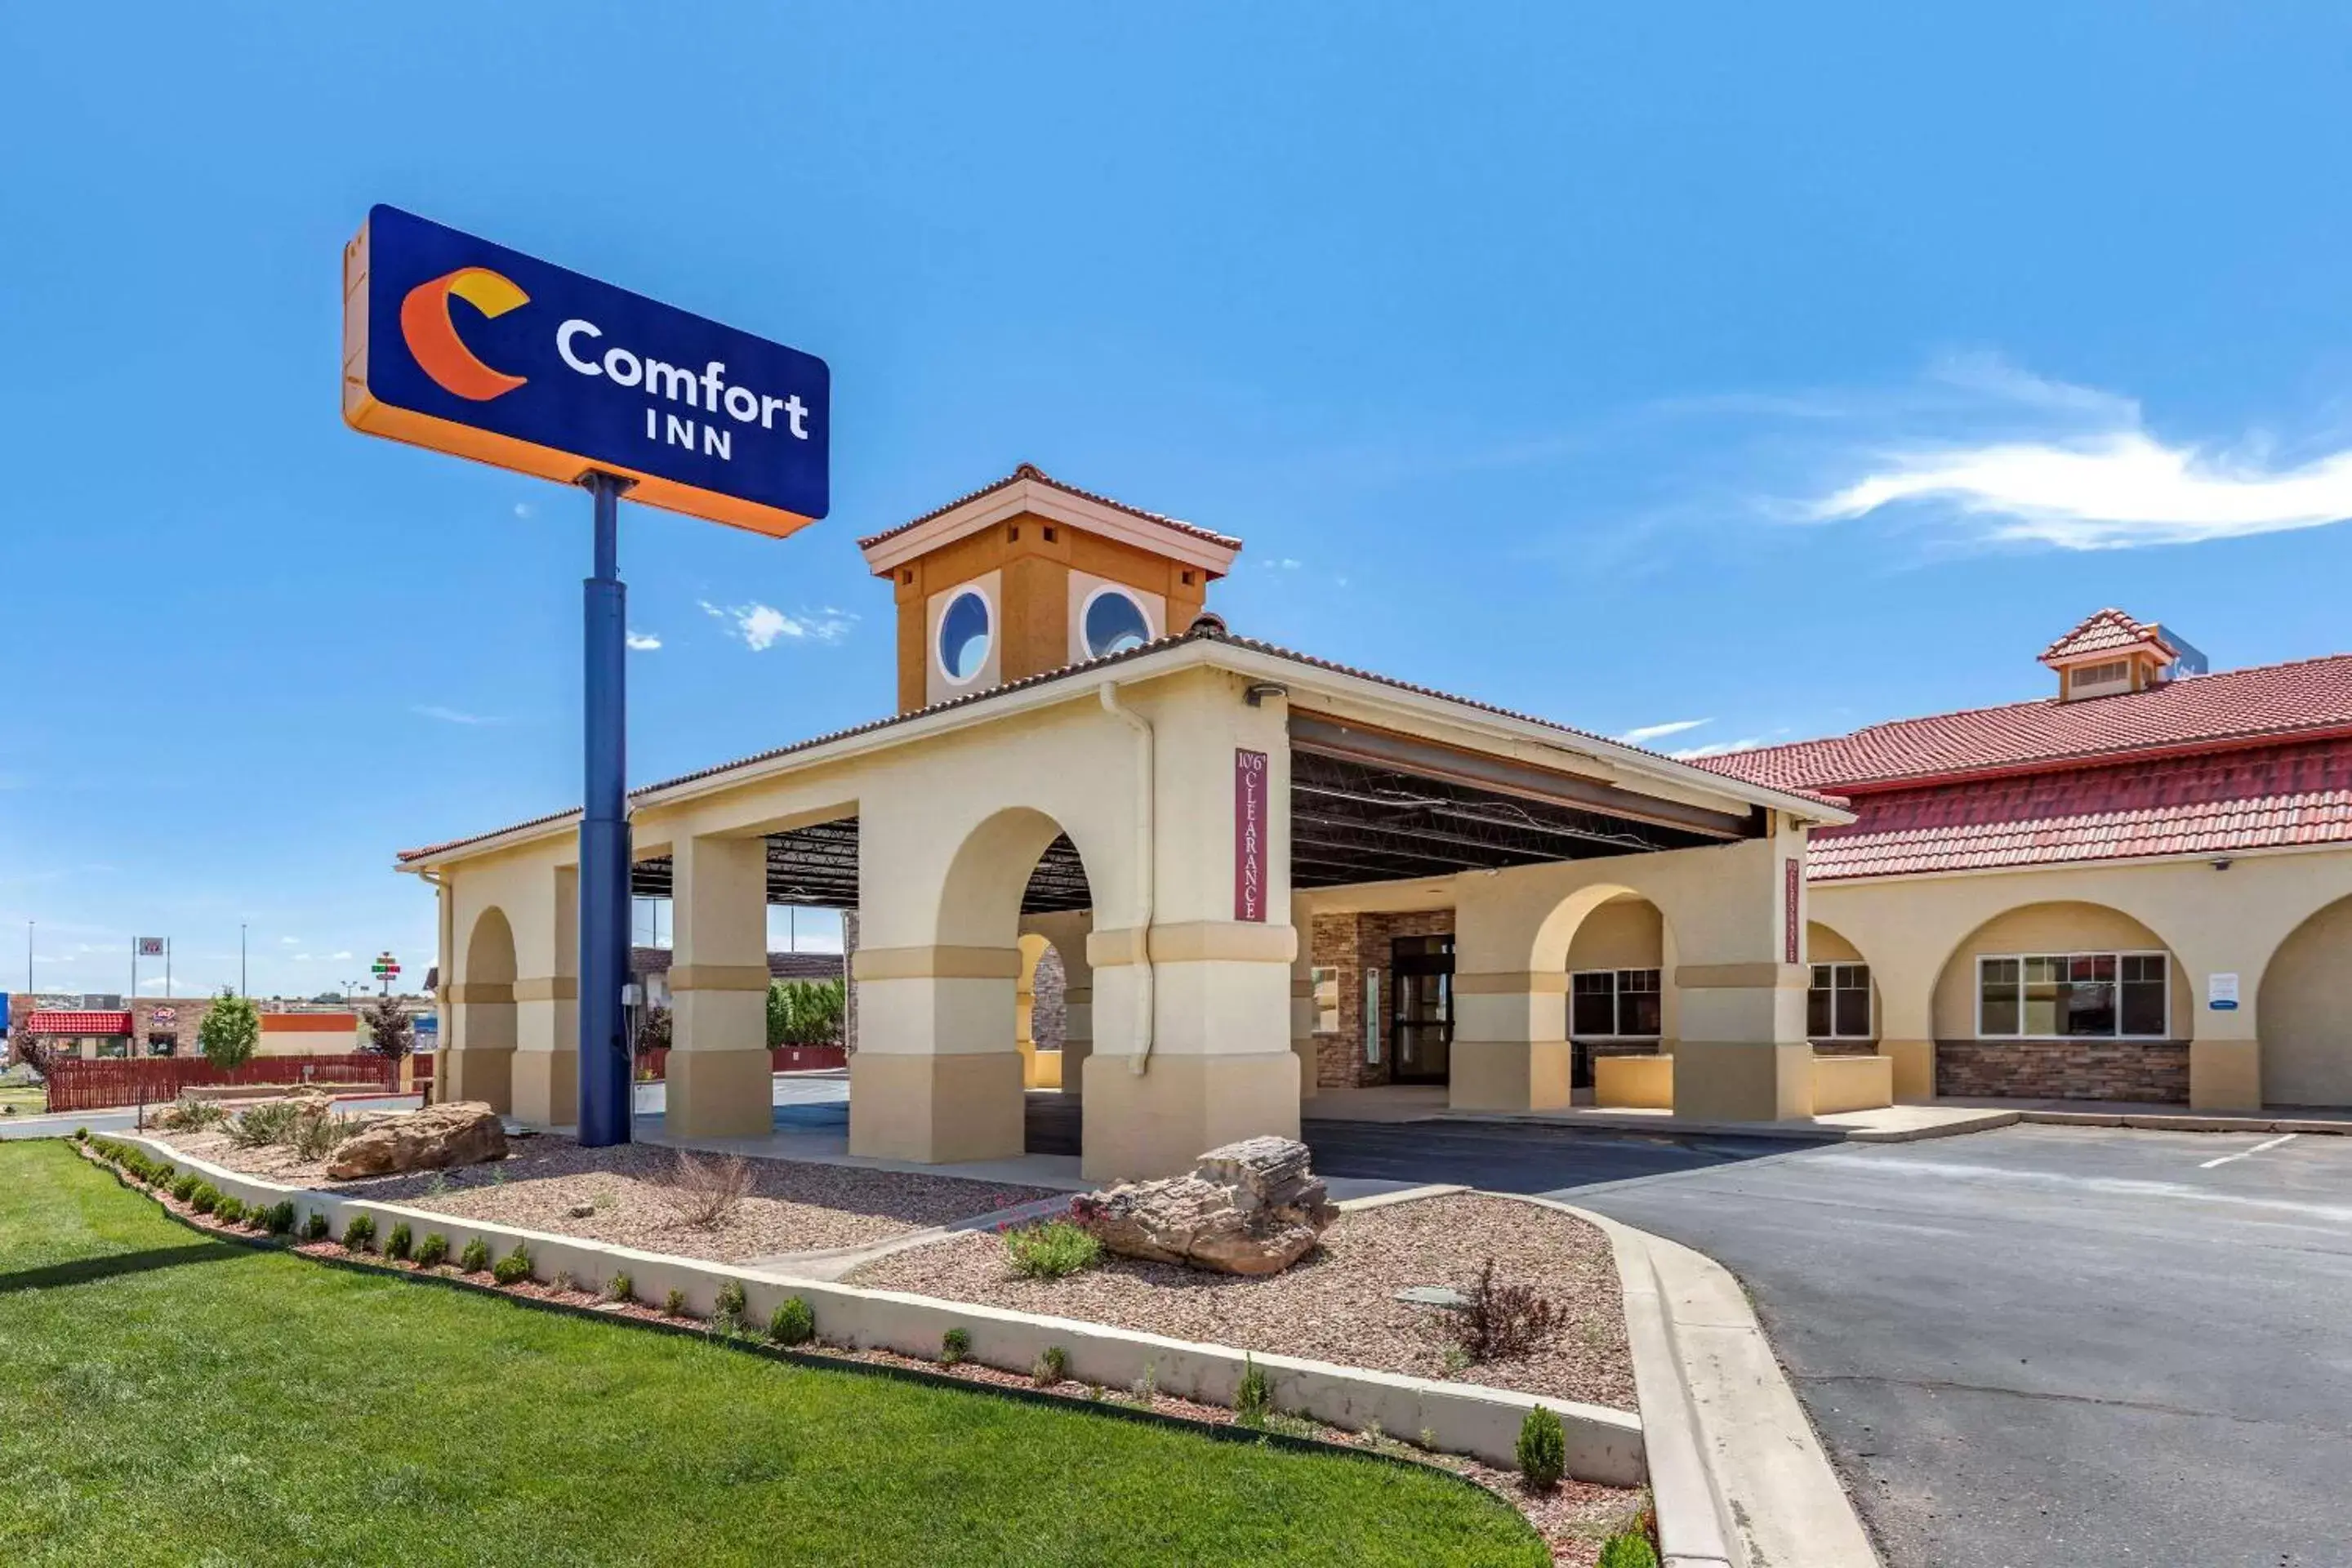 Property Building in Comfort Inn City of Natural Lakes